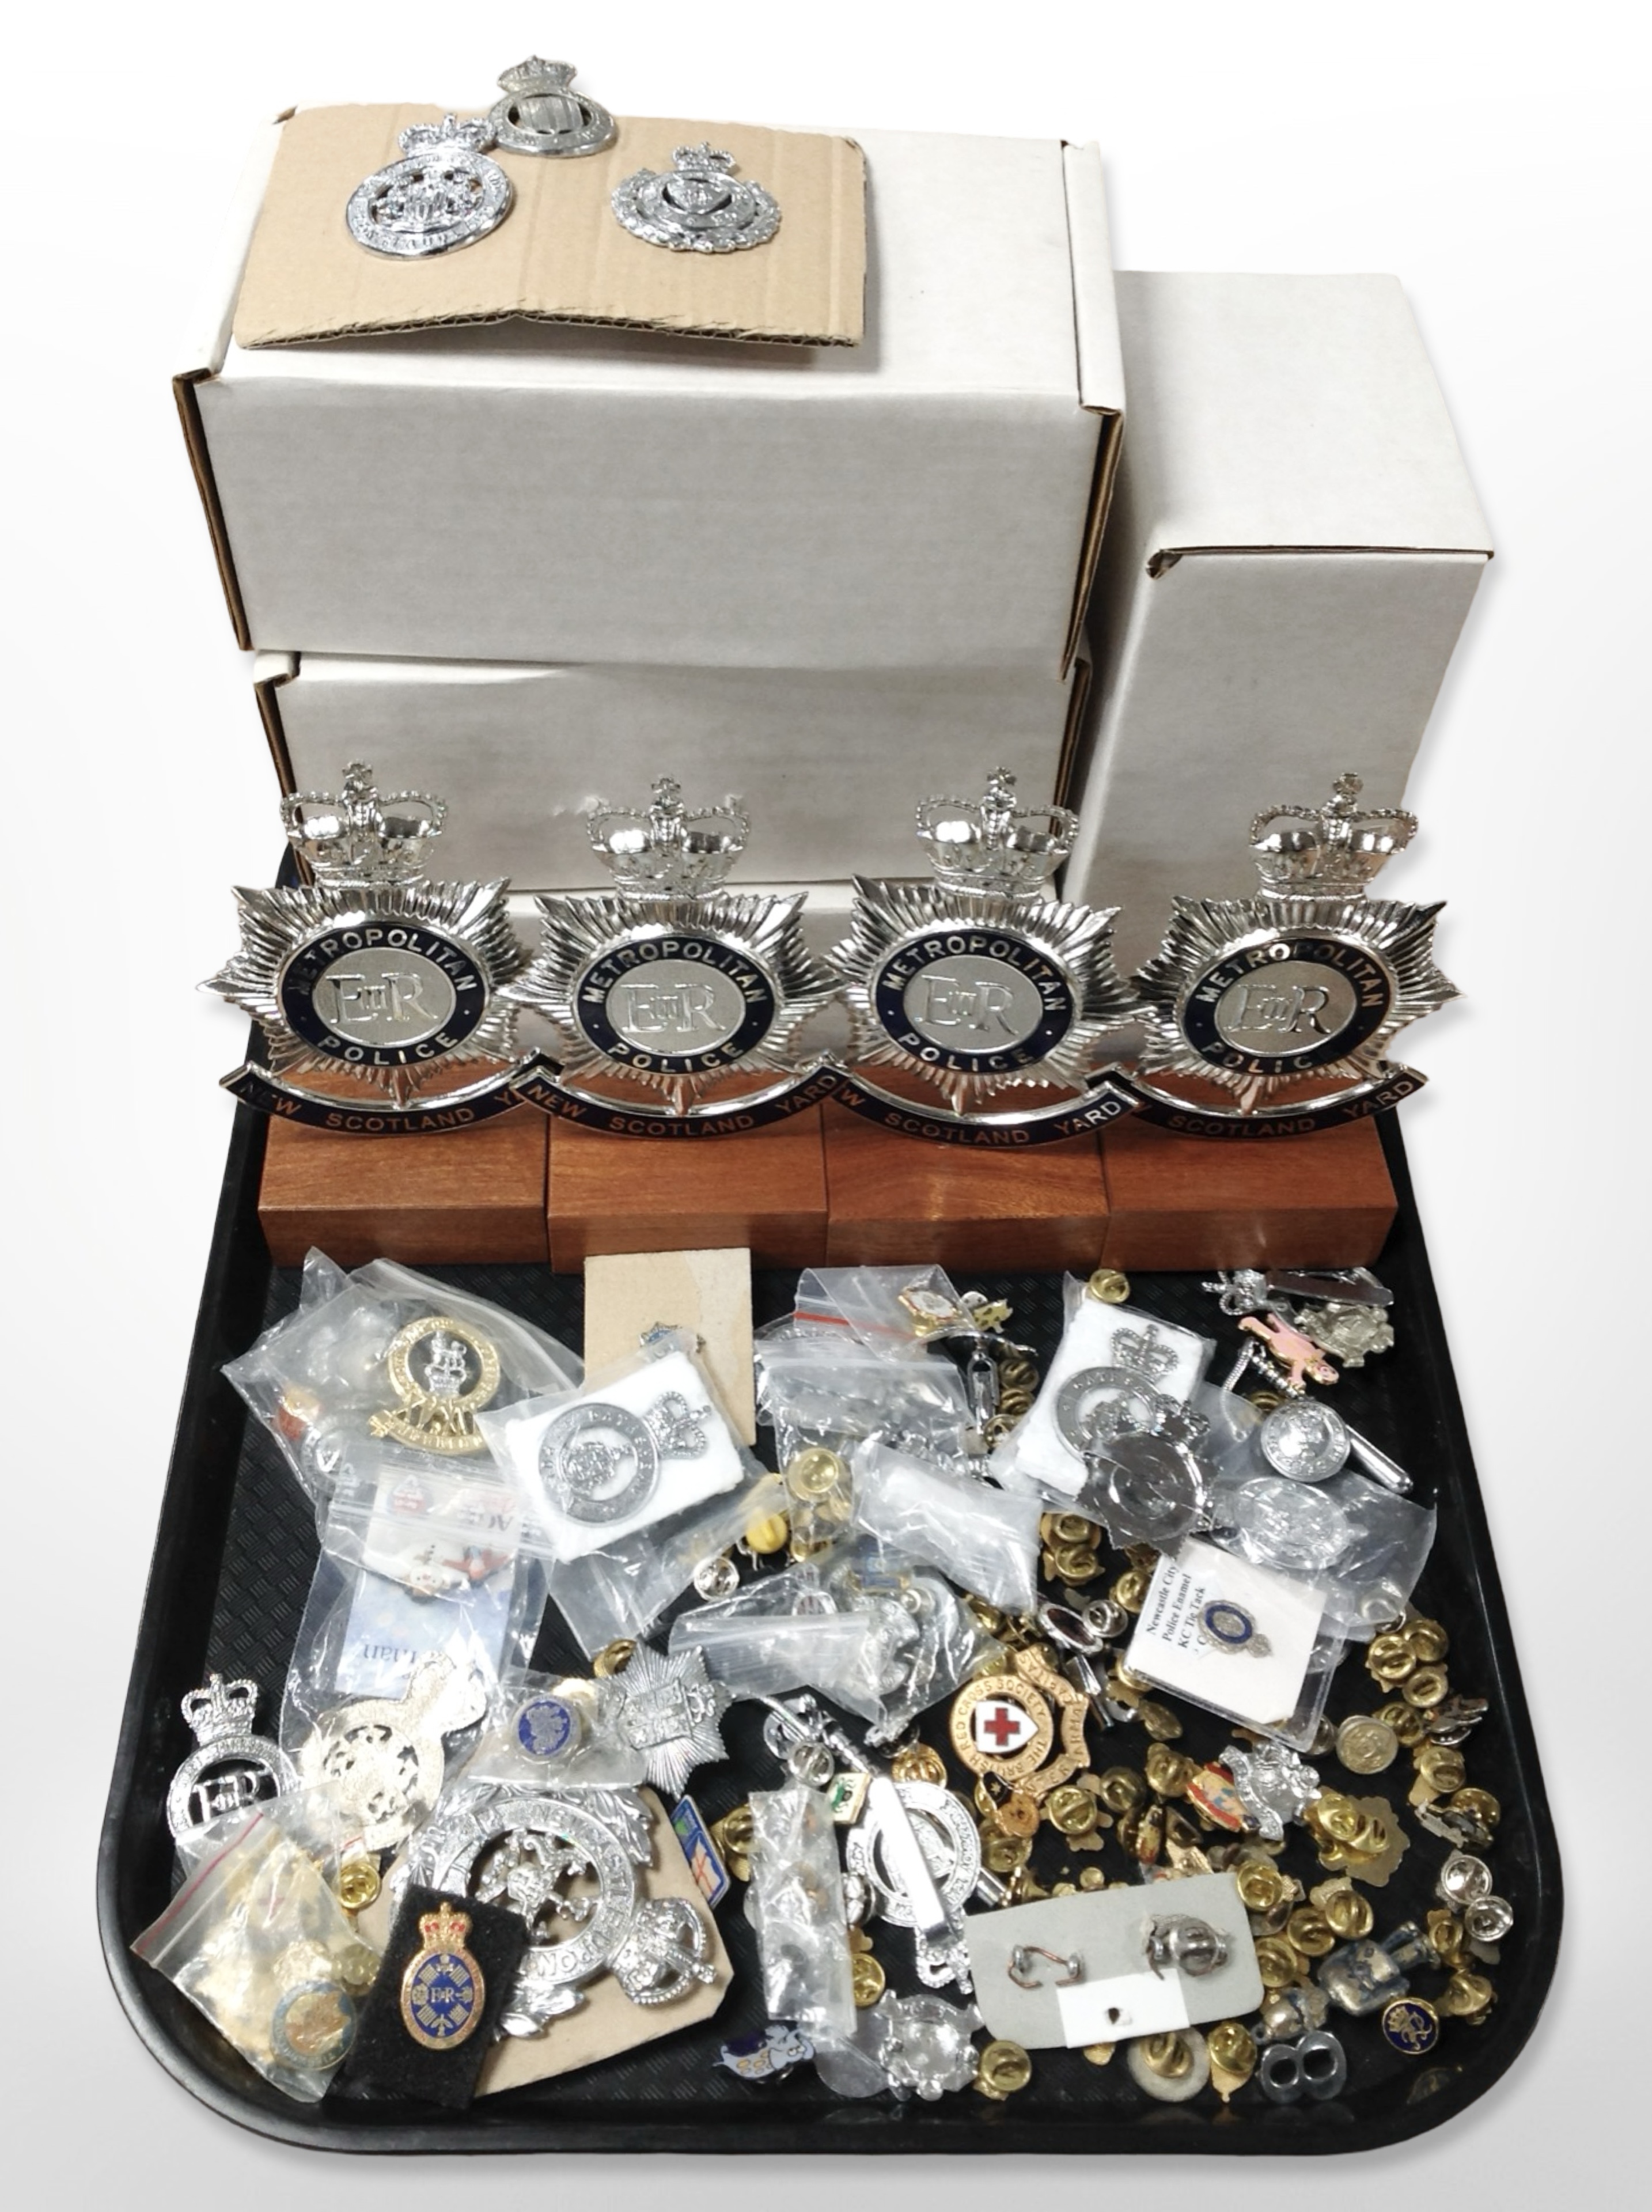 A group of Metropolitan police and other constabulary badges, lapel pins, etc.